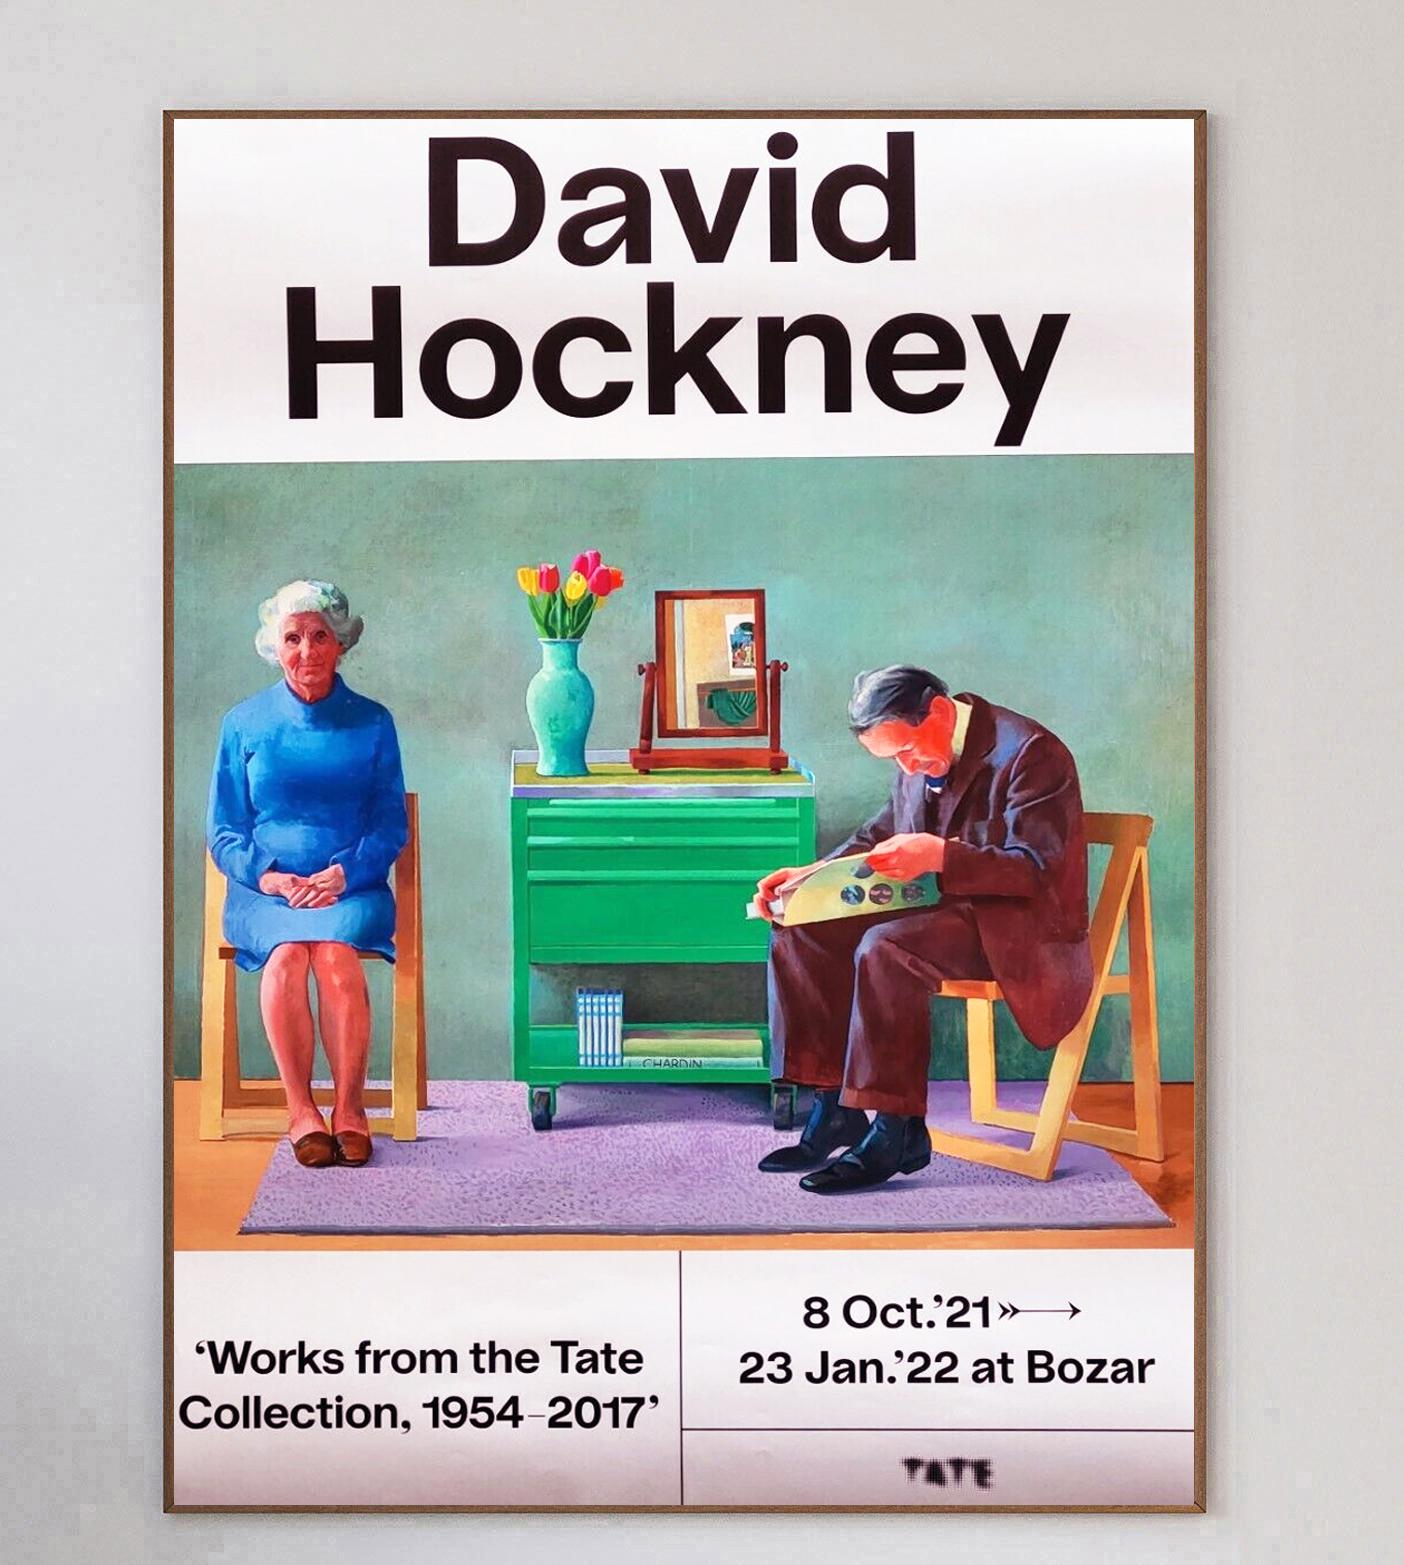 This wonderful poster promotes the David Hockney exhibition 